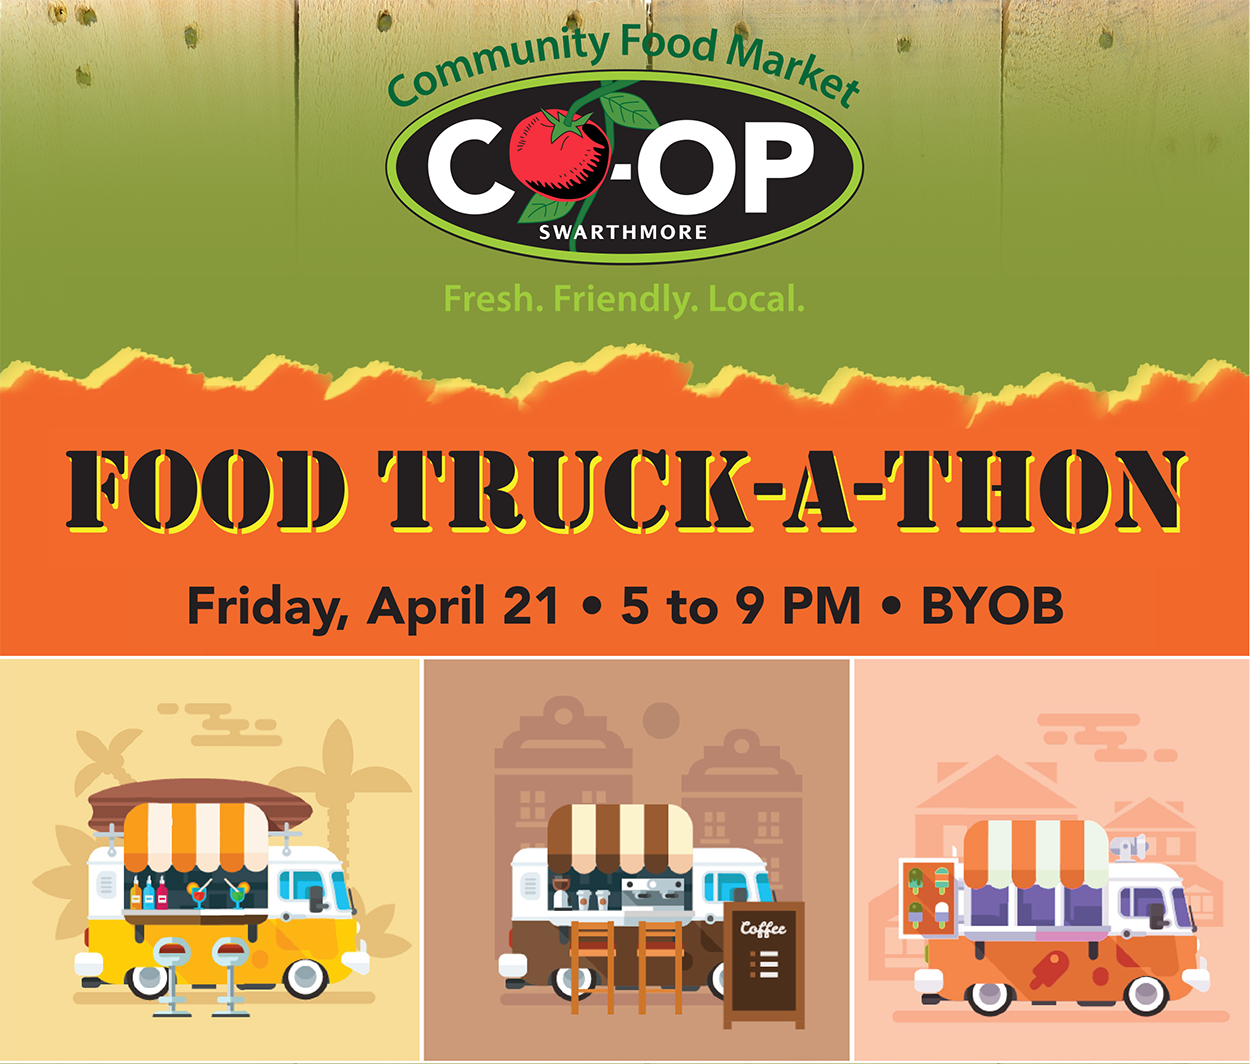 food truck-a-thon graphic